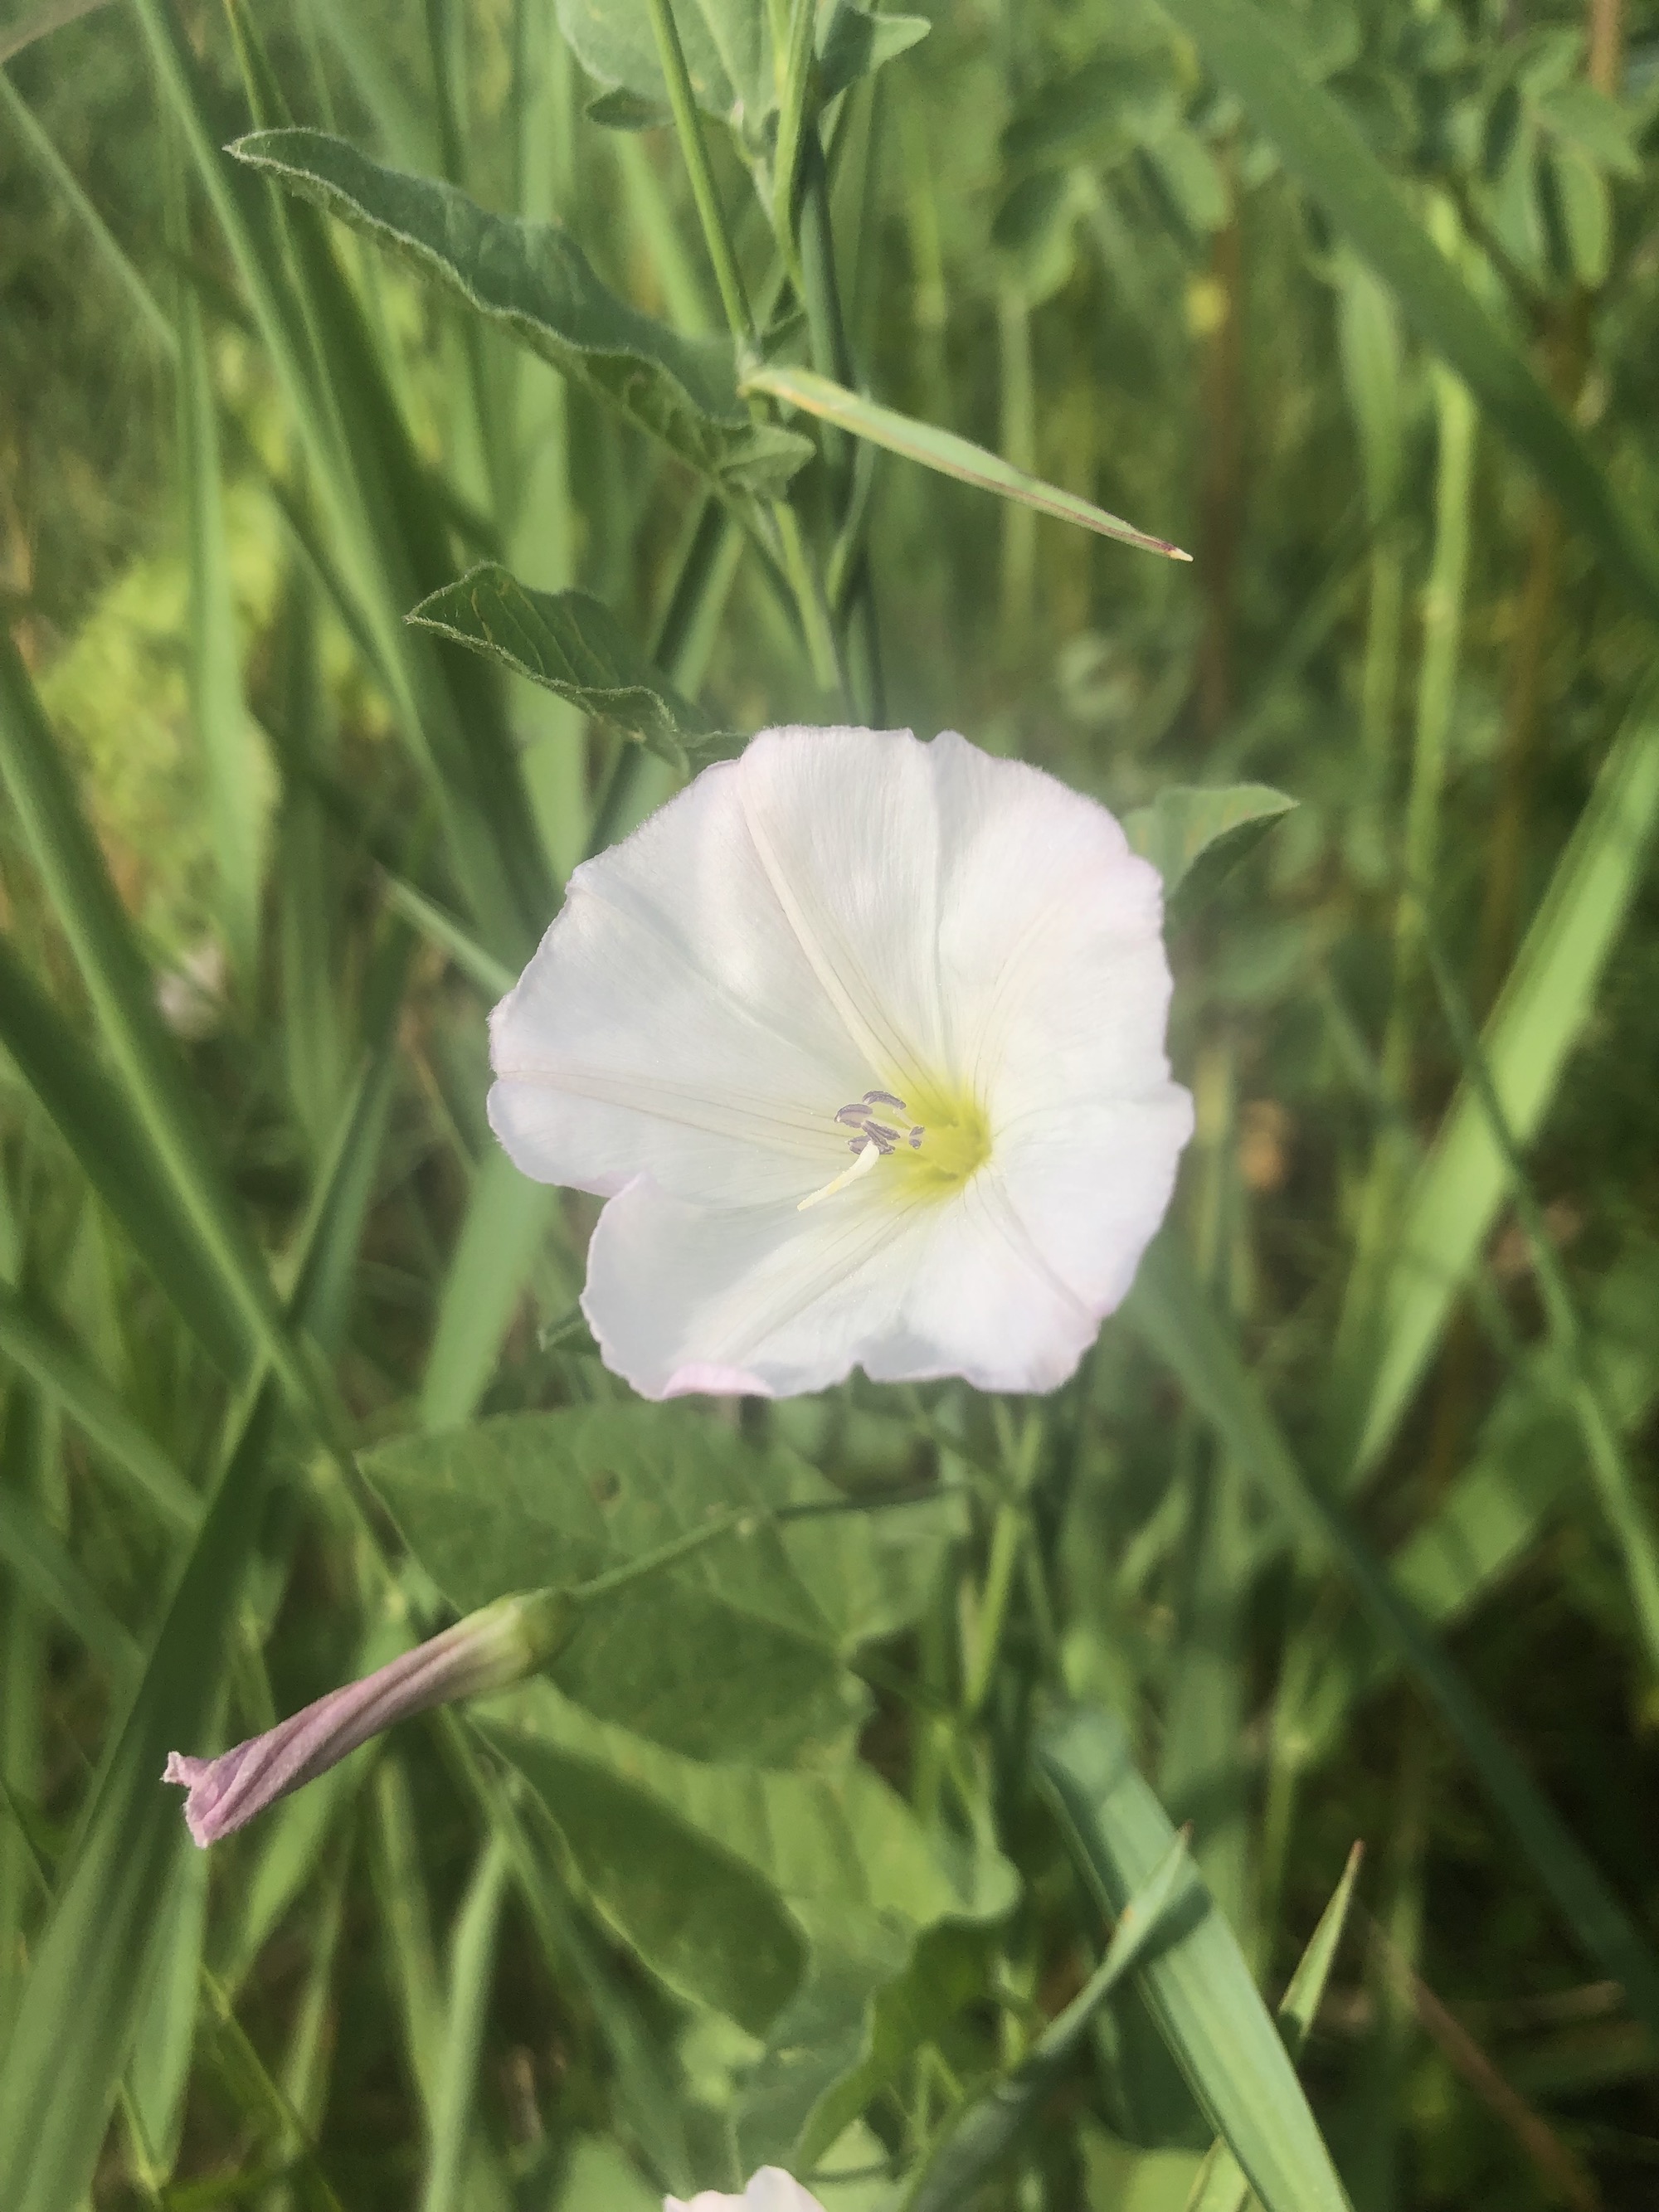 Field Bindweed on shore of Marion Dunn Pond in Madison, Wisconsin on June 15, 2021.